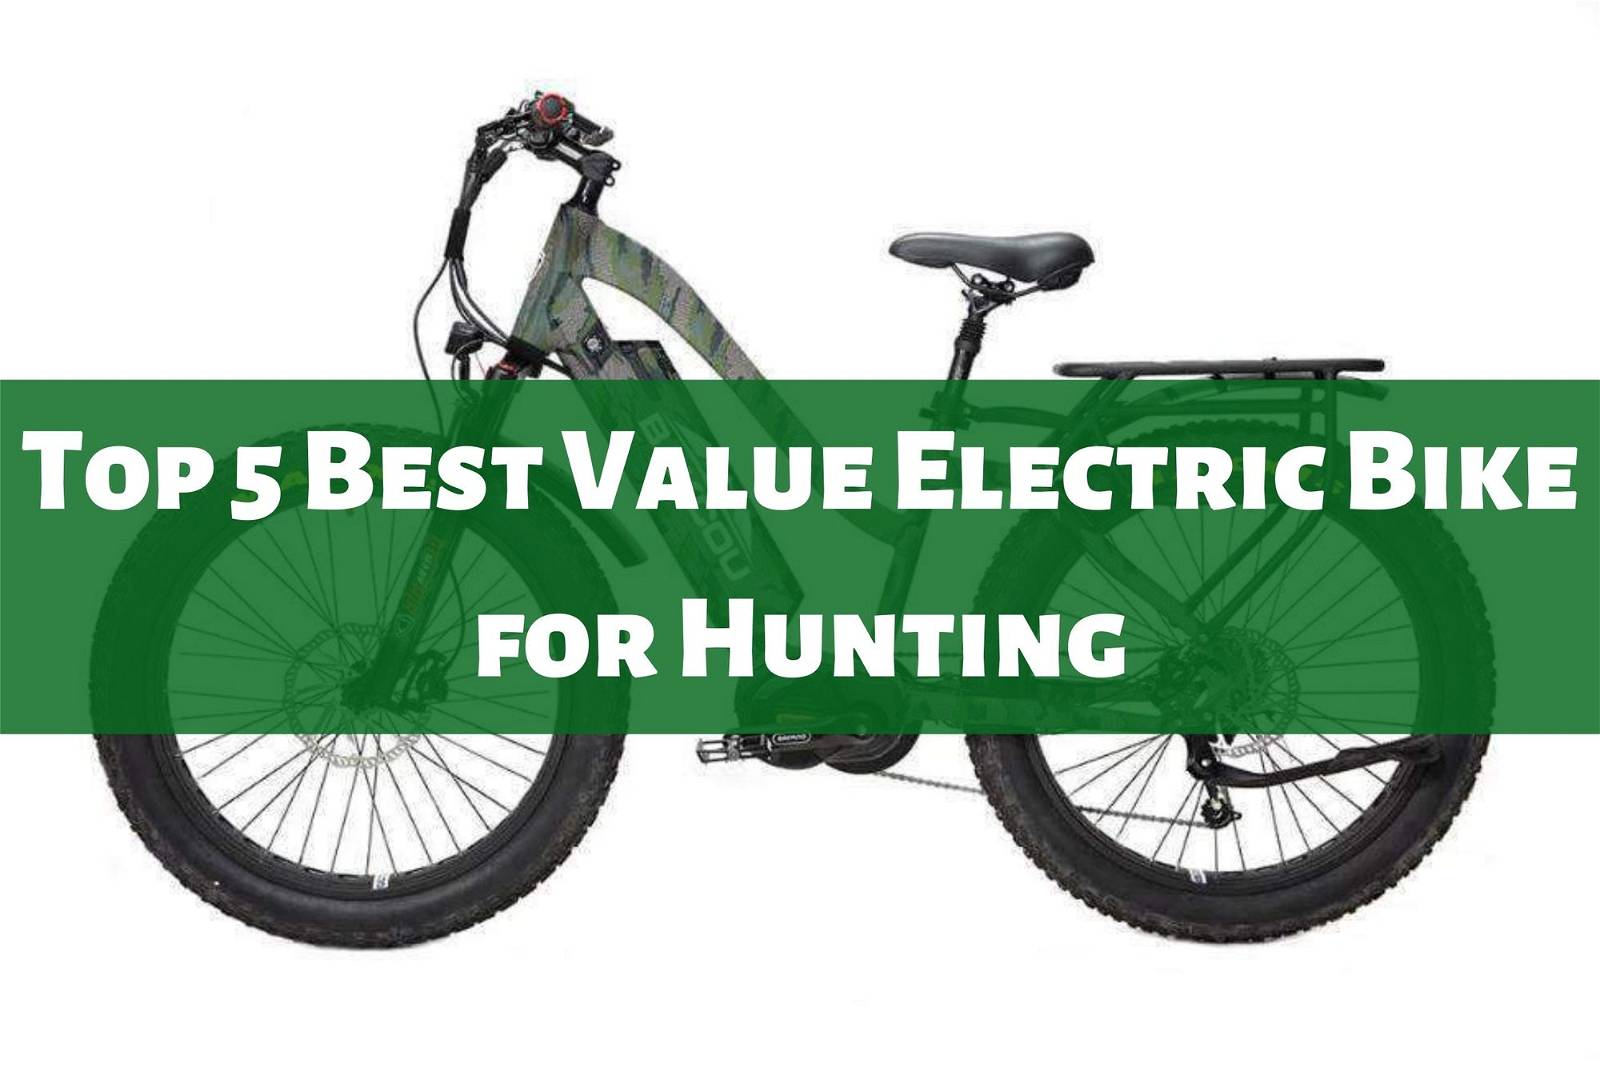 Top 5 Best Value Electric Bike for Hunting